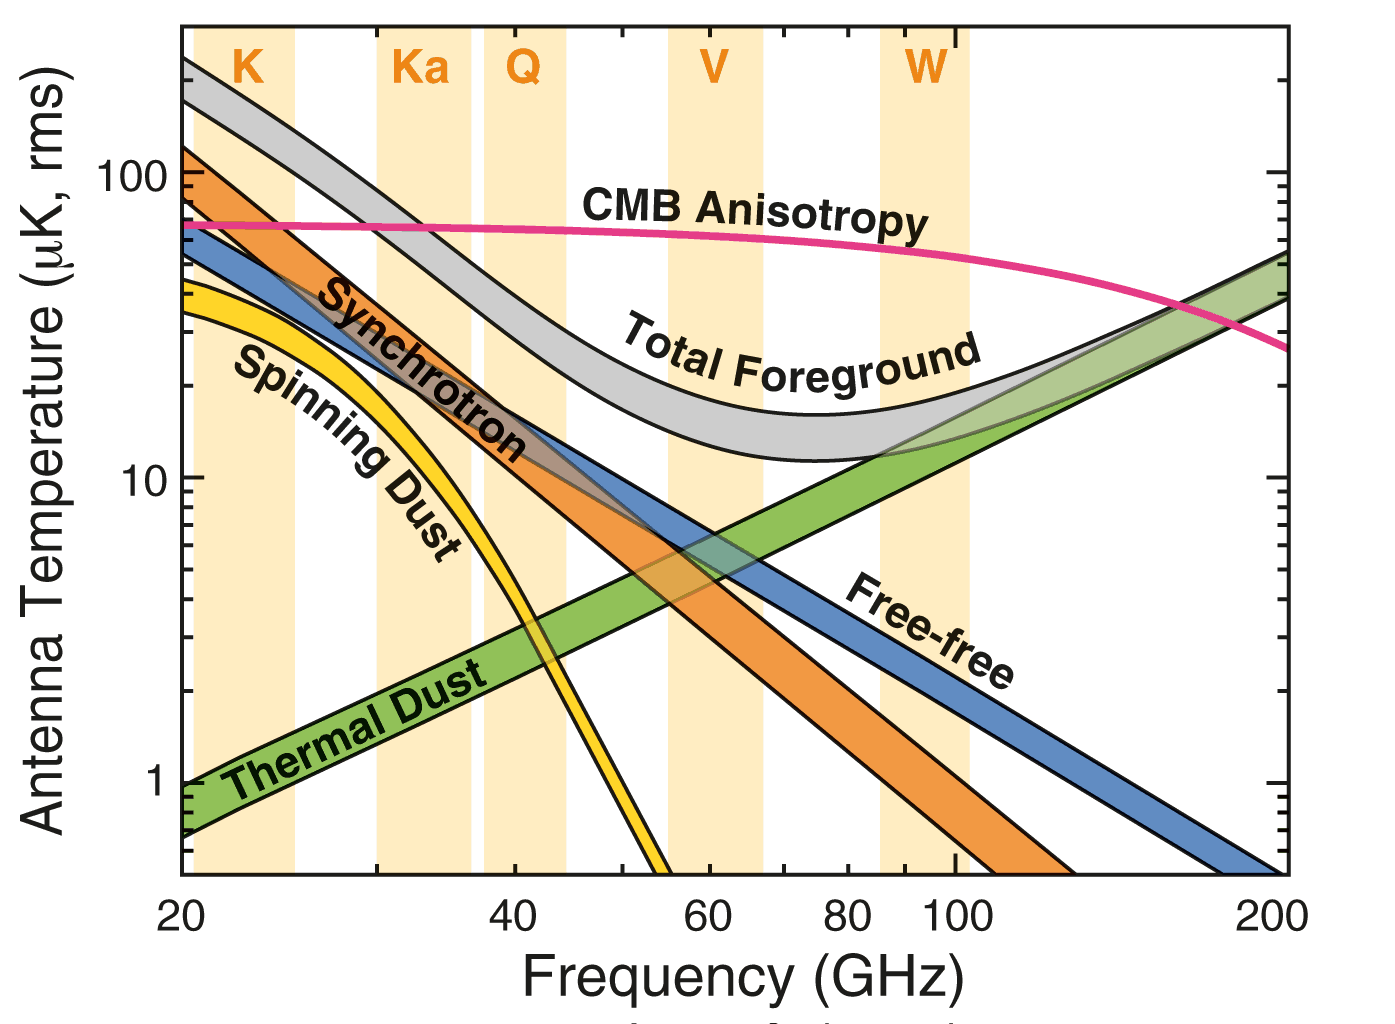 Plot of Anisotropy vs. Frequency